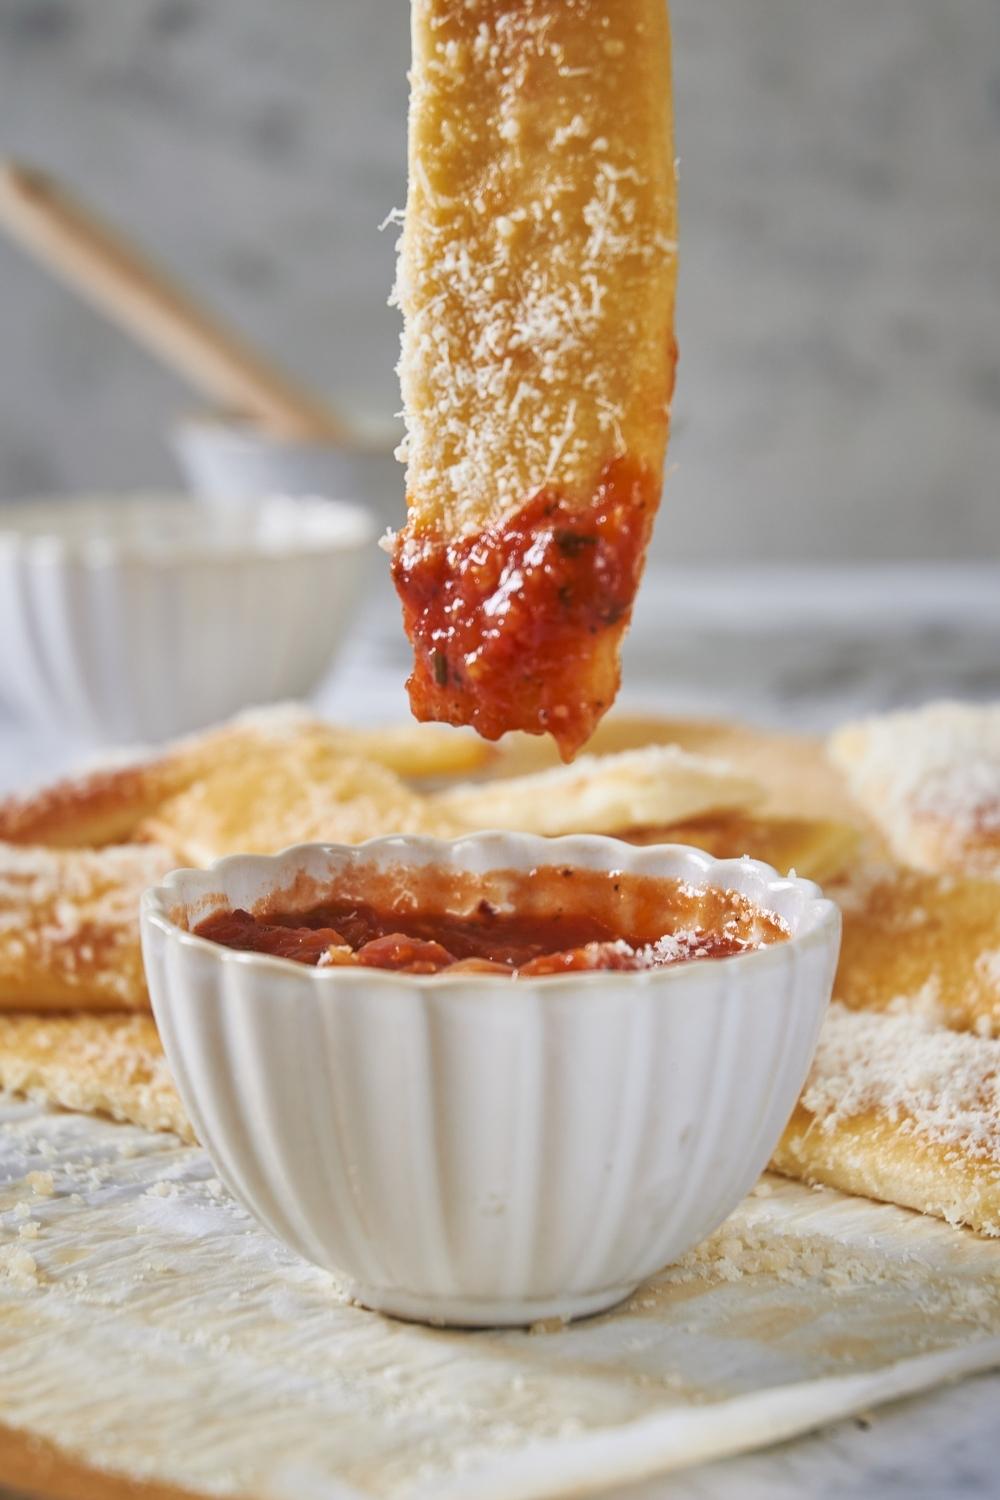 A stick of little caesars crazy bread has been dunked into the side bowl of pizza sauce and is getting lifted out. The remaining little caesars crazy bread sticks are on a cutting board in the background.